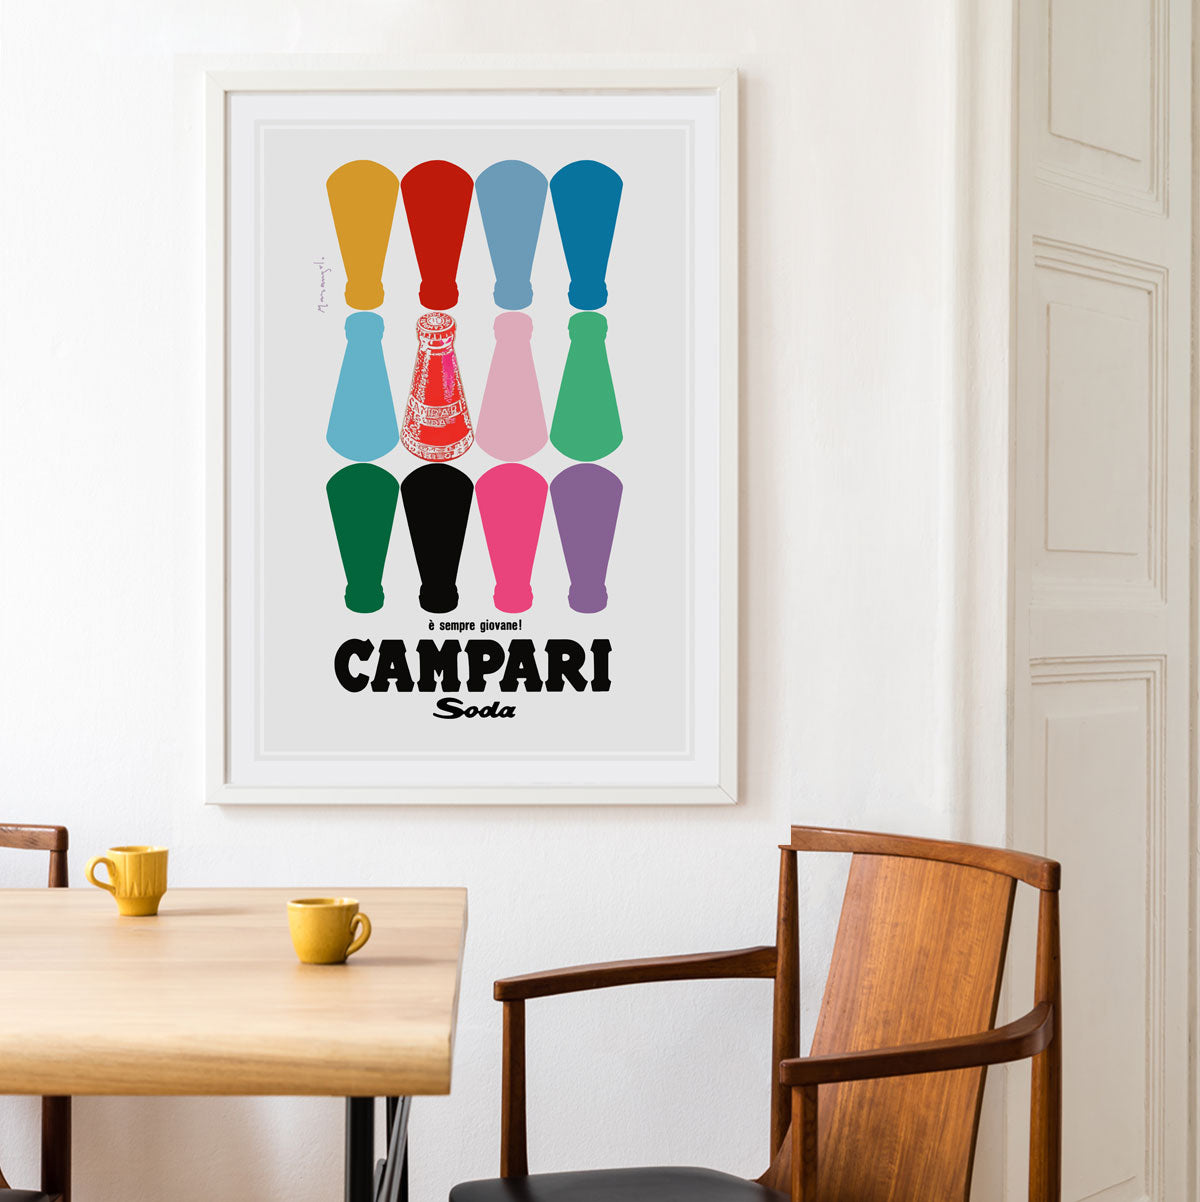 Campari Soda #2 vintage retro advertising poster from Places We Luv